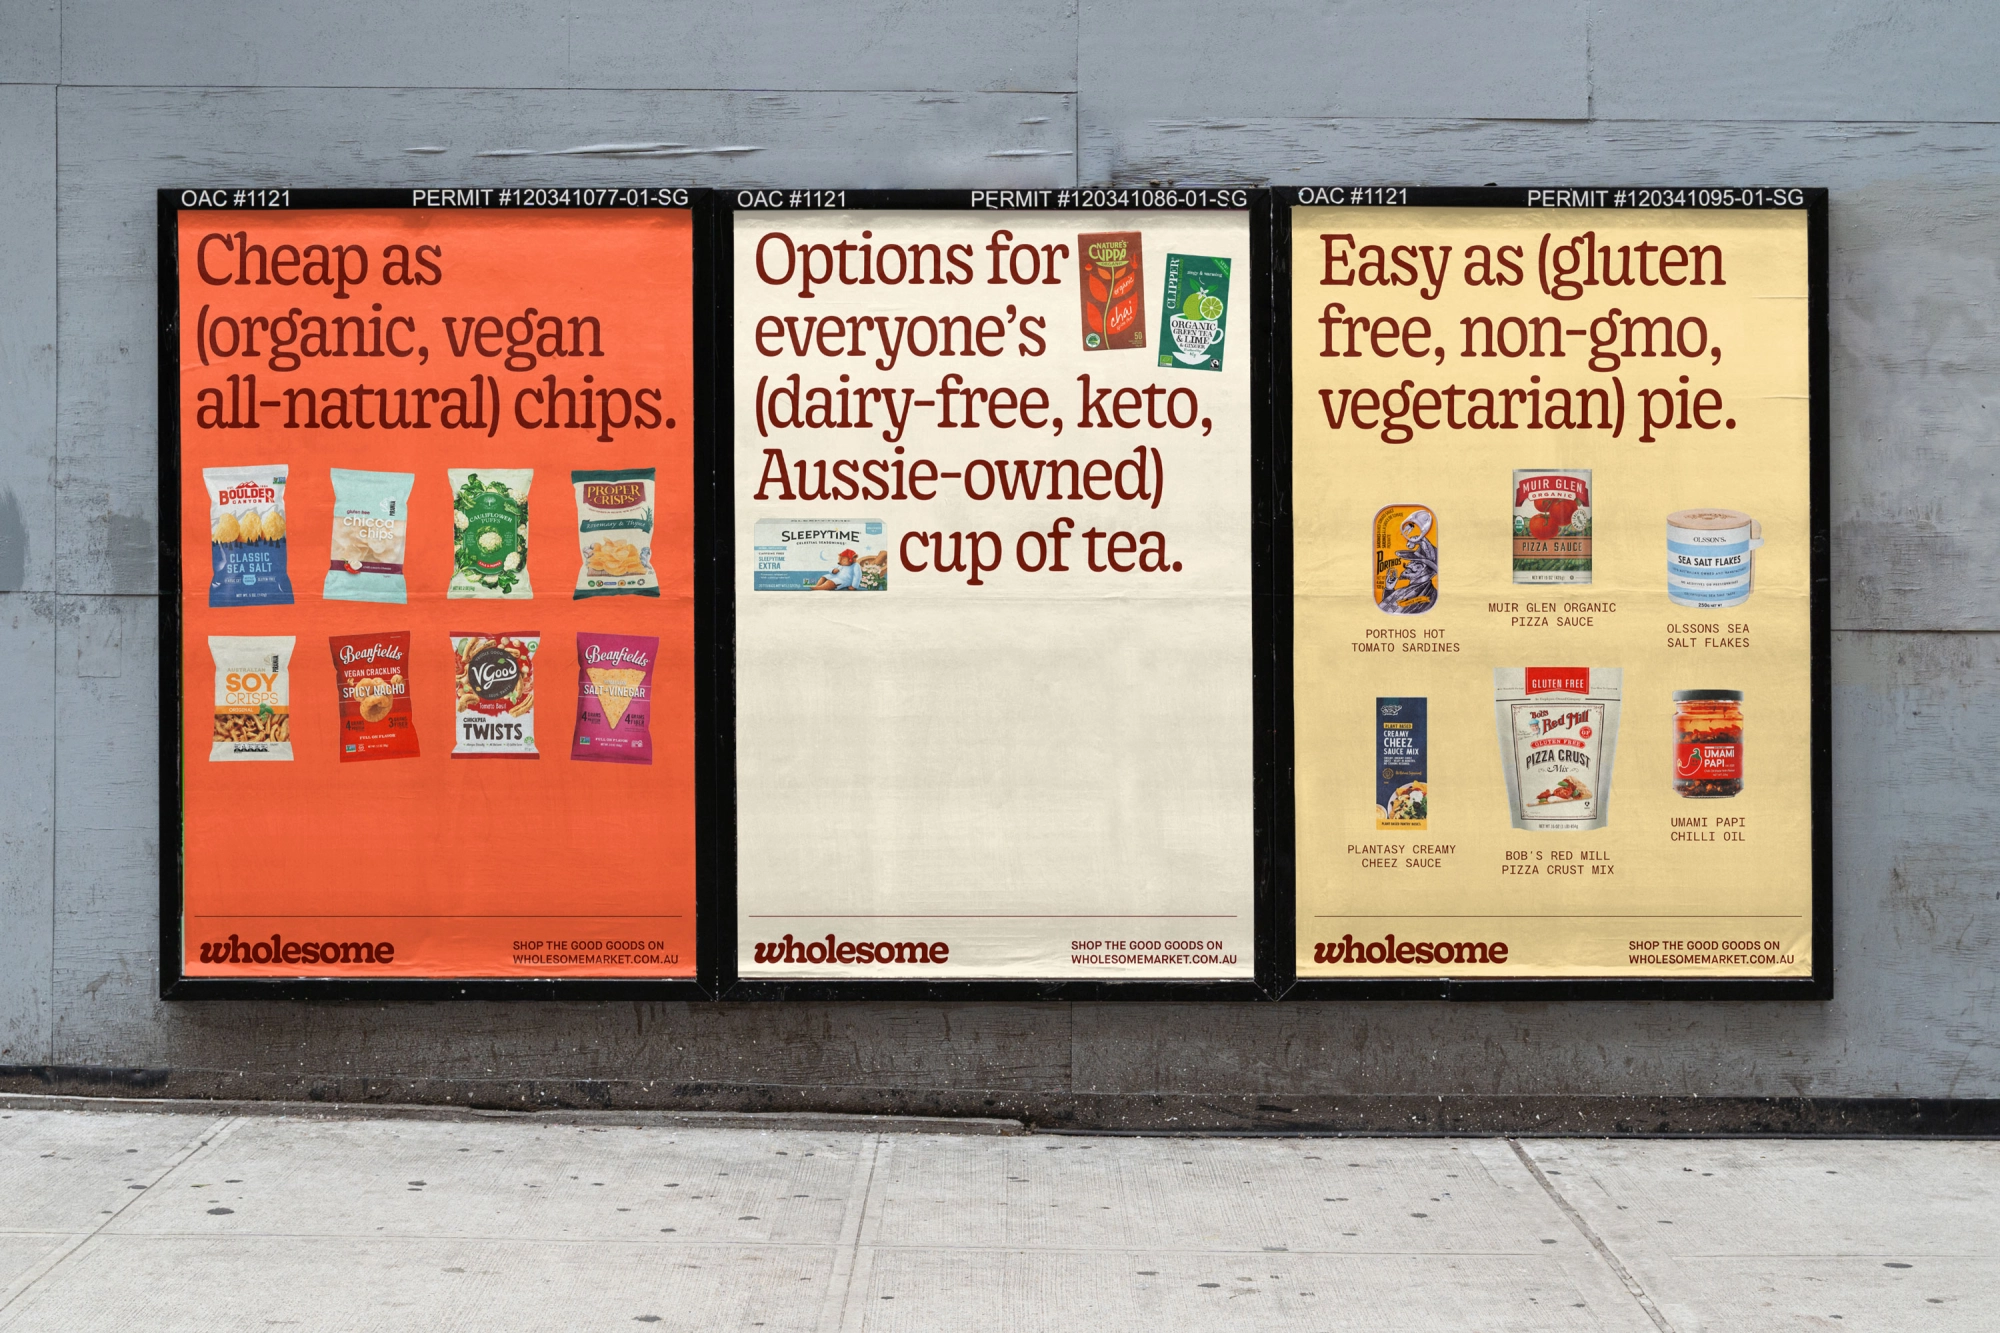 Art direction, copywriting and poster design for Australian online grocer Wholesome designed by Universal Favourite